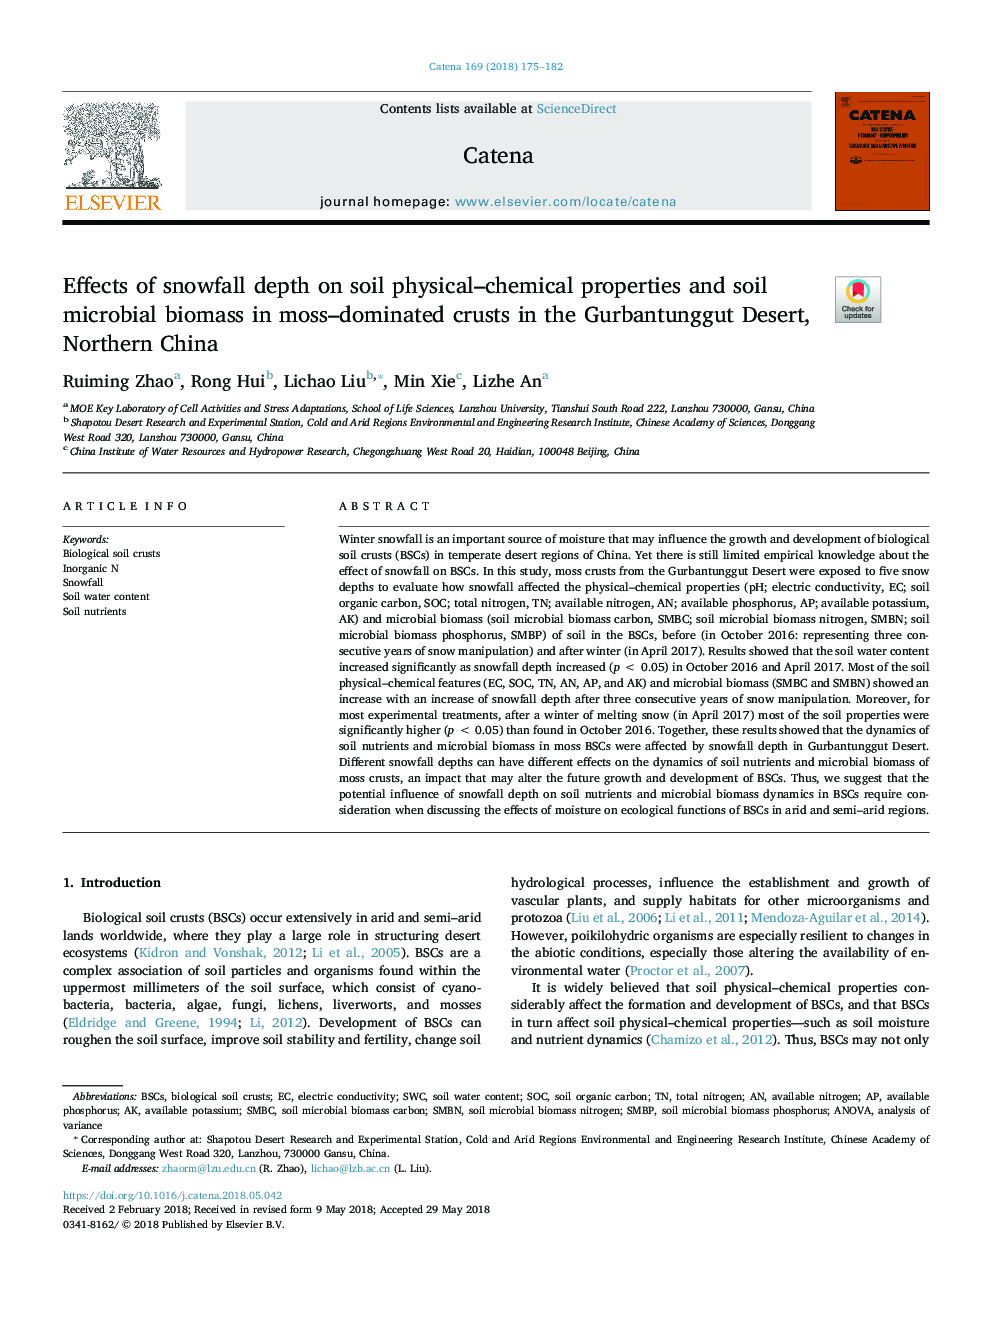 Effects of snowfall depth on soil physical-chemical properties and soil microbial biomass in moss-dominated crusts in the Gurbantunggut Desert, Northern China